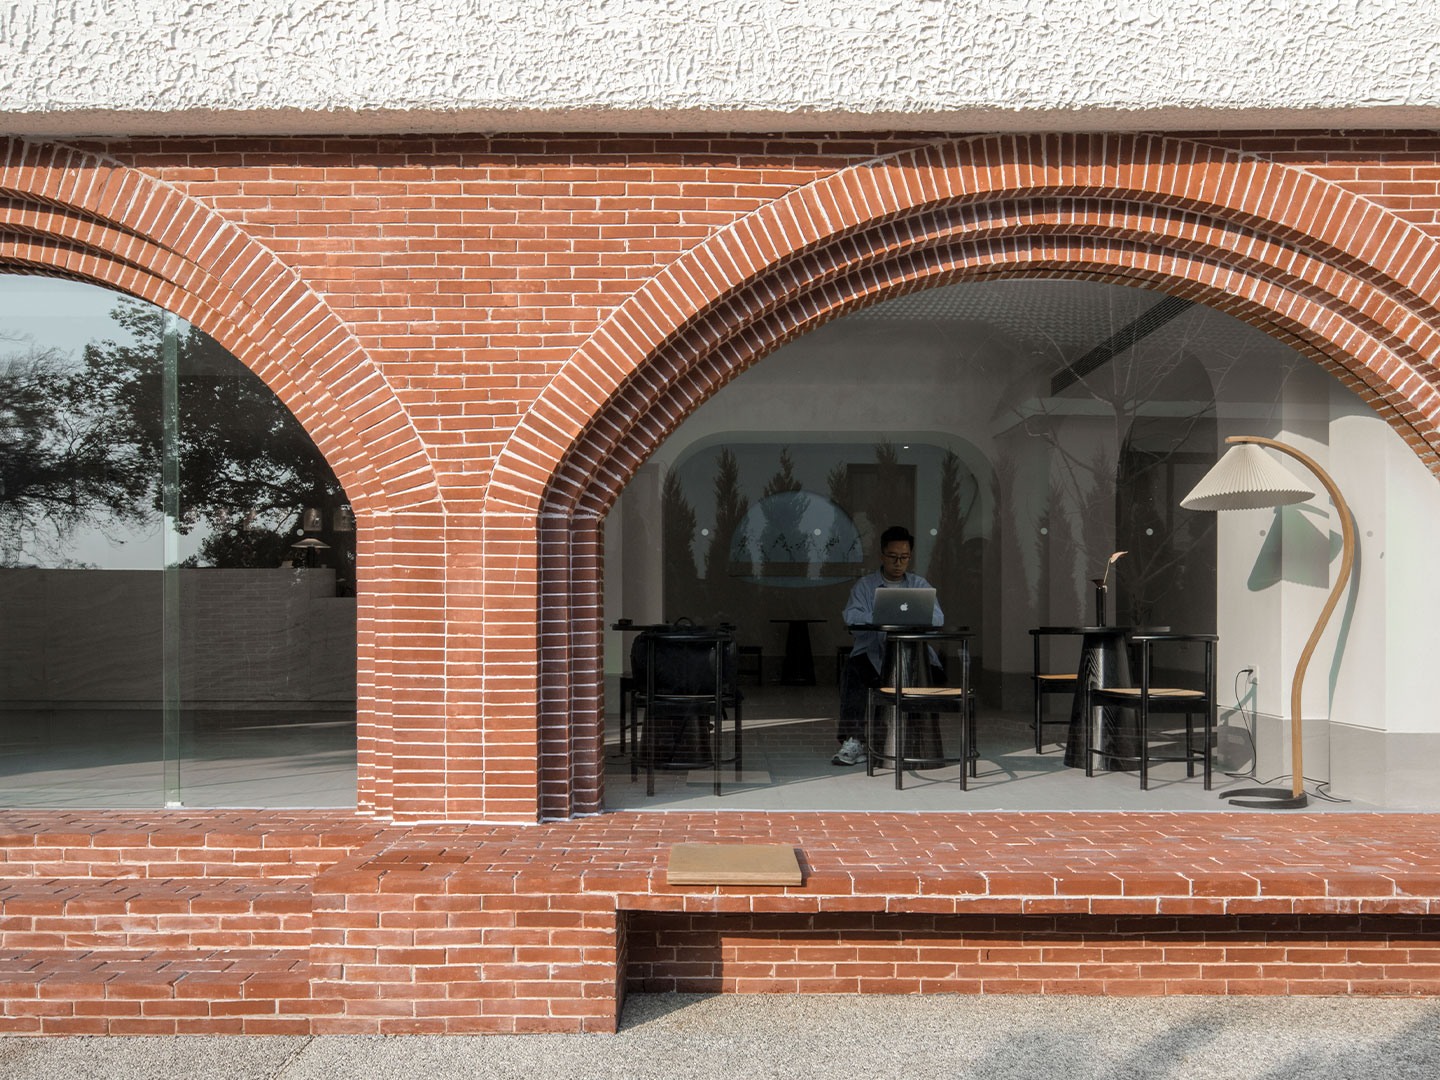 The red brick arches at LittleNap in China